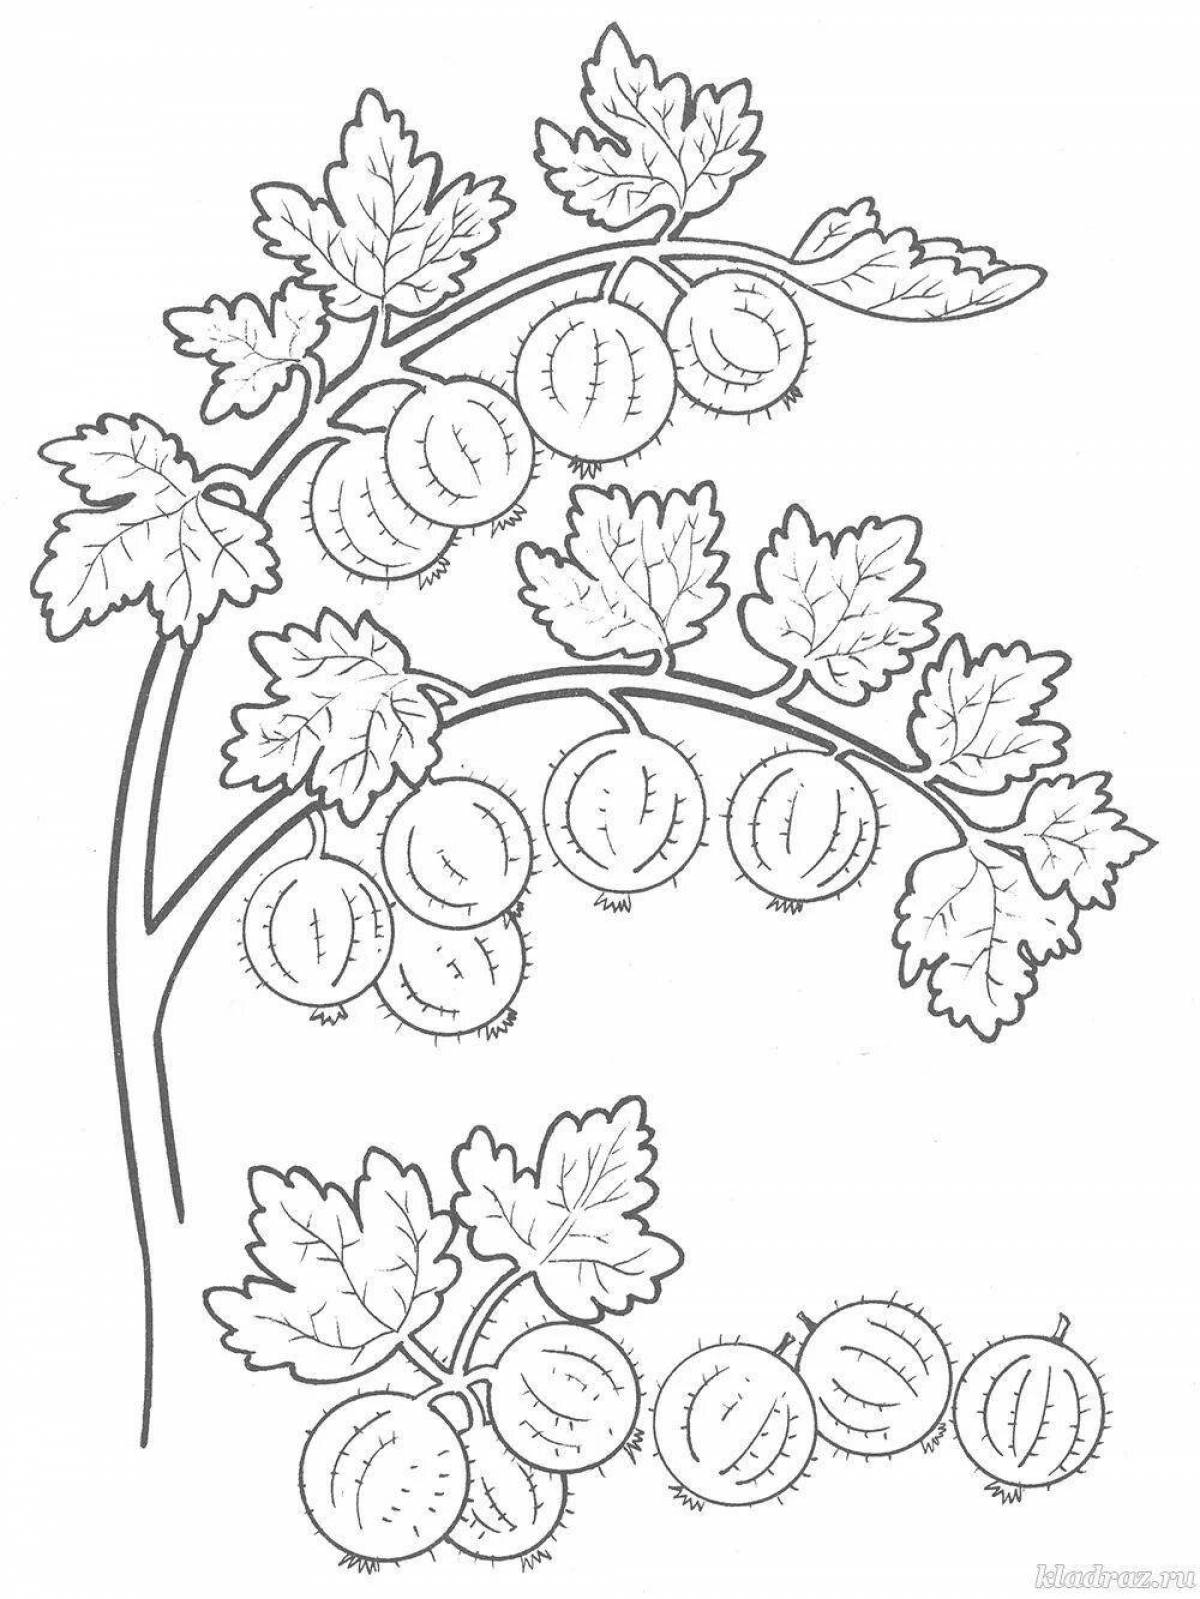 Great gooseberry coloring book for students